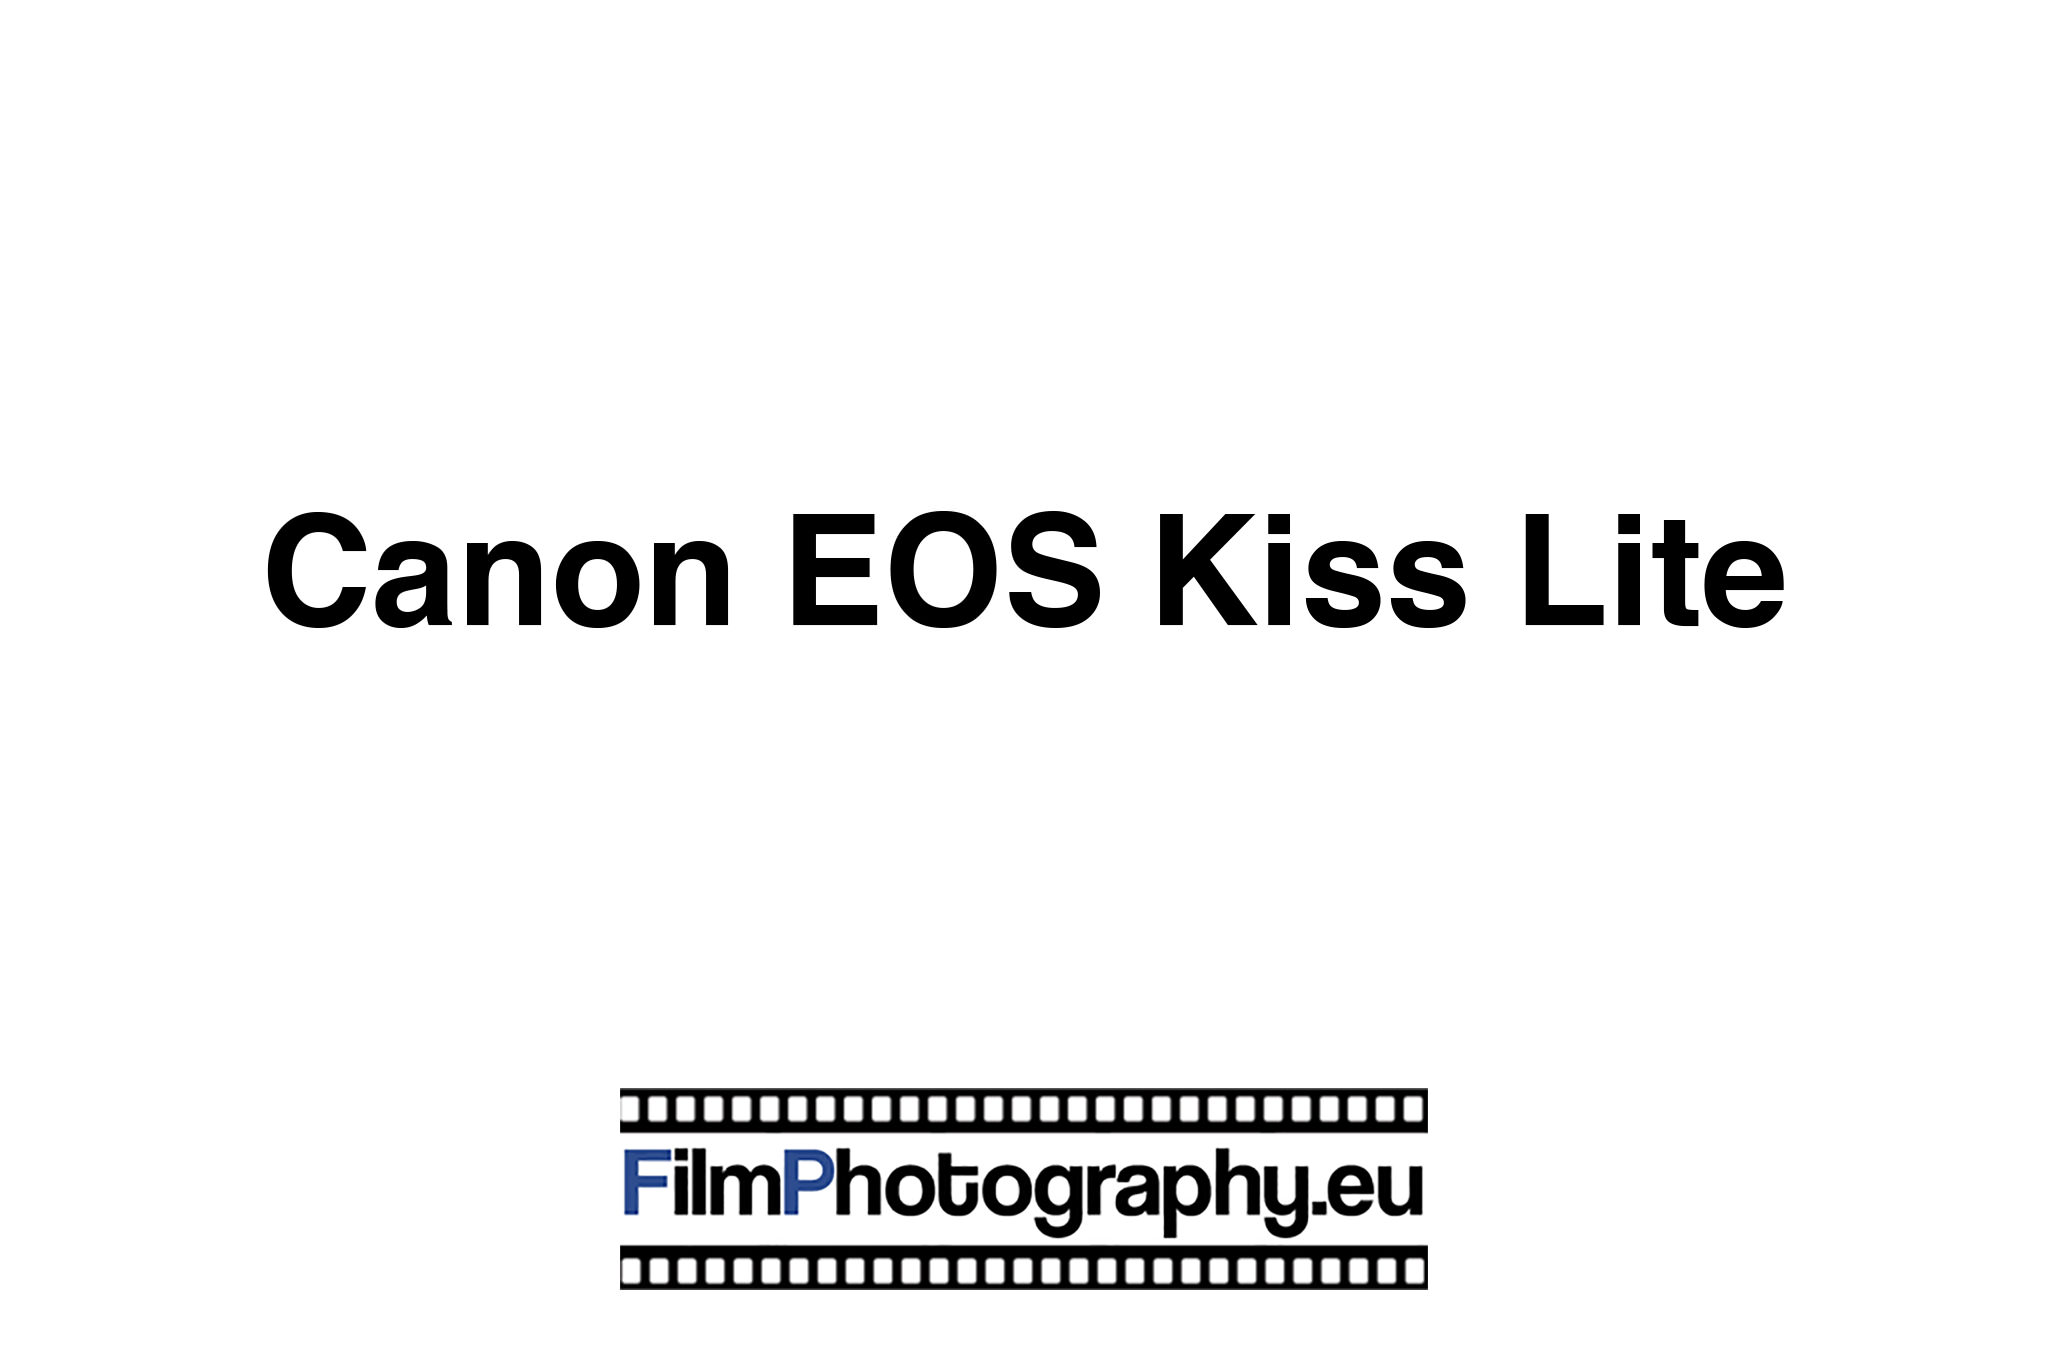 Canon EOS Kiss III - Background to films, batteries and the camera